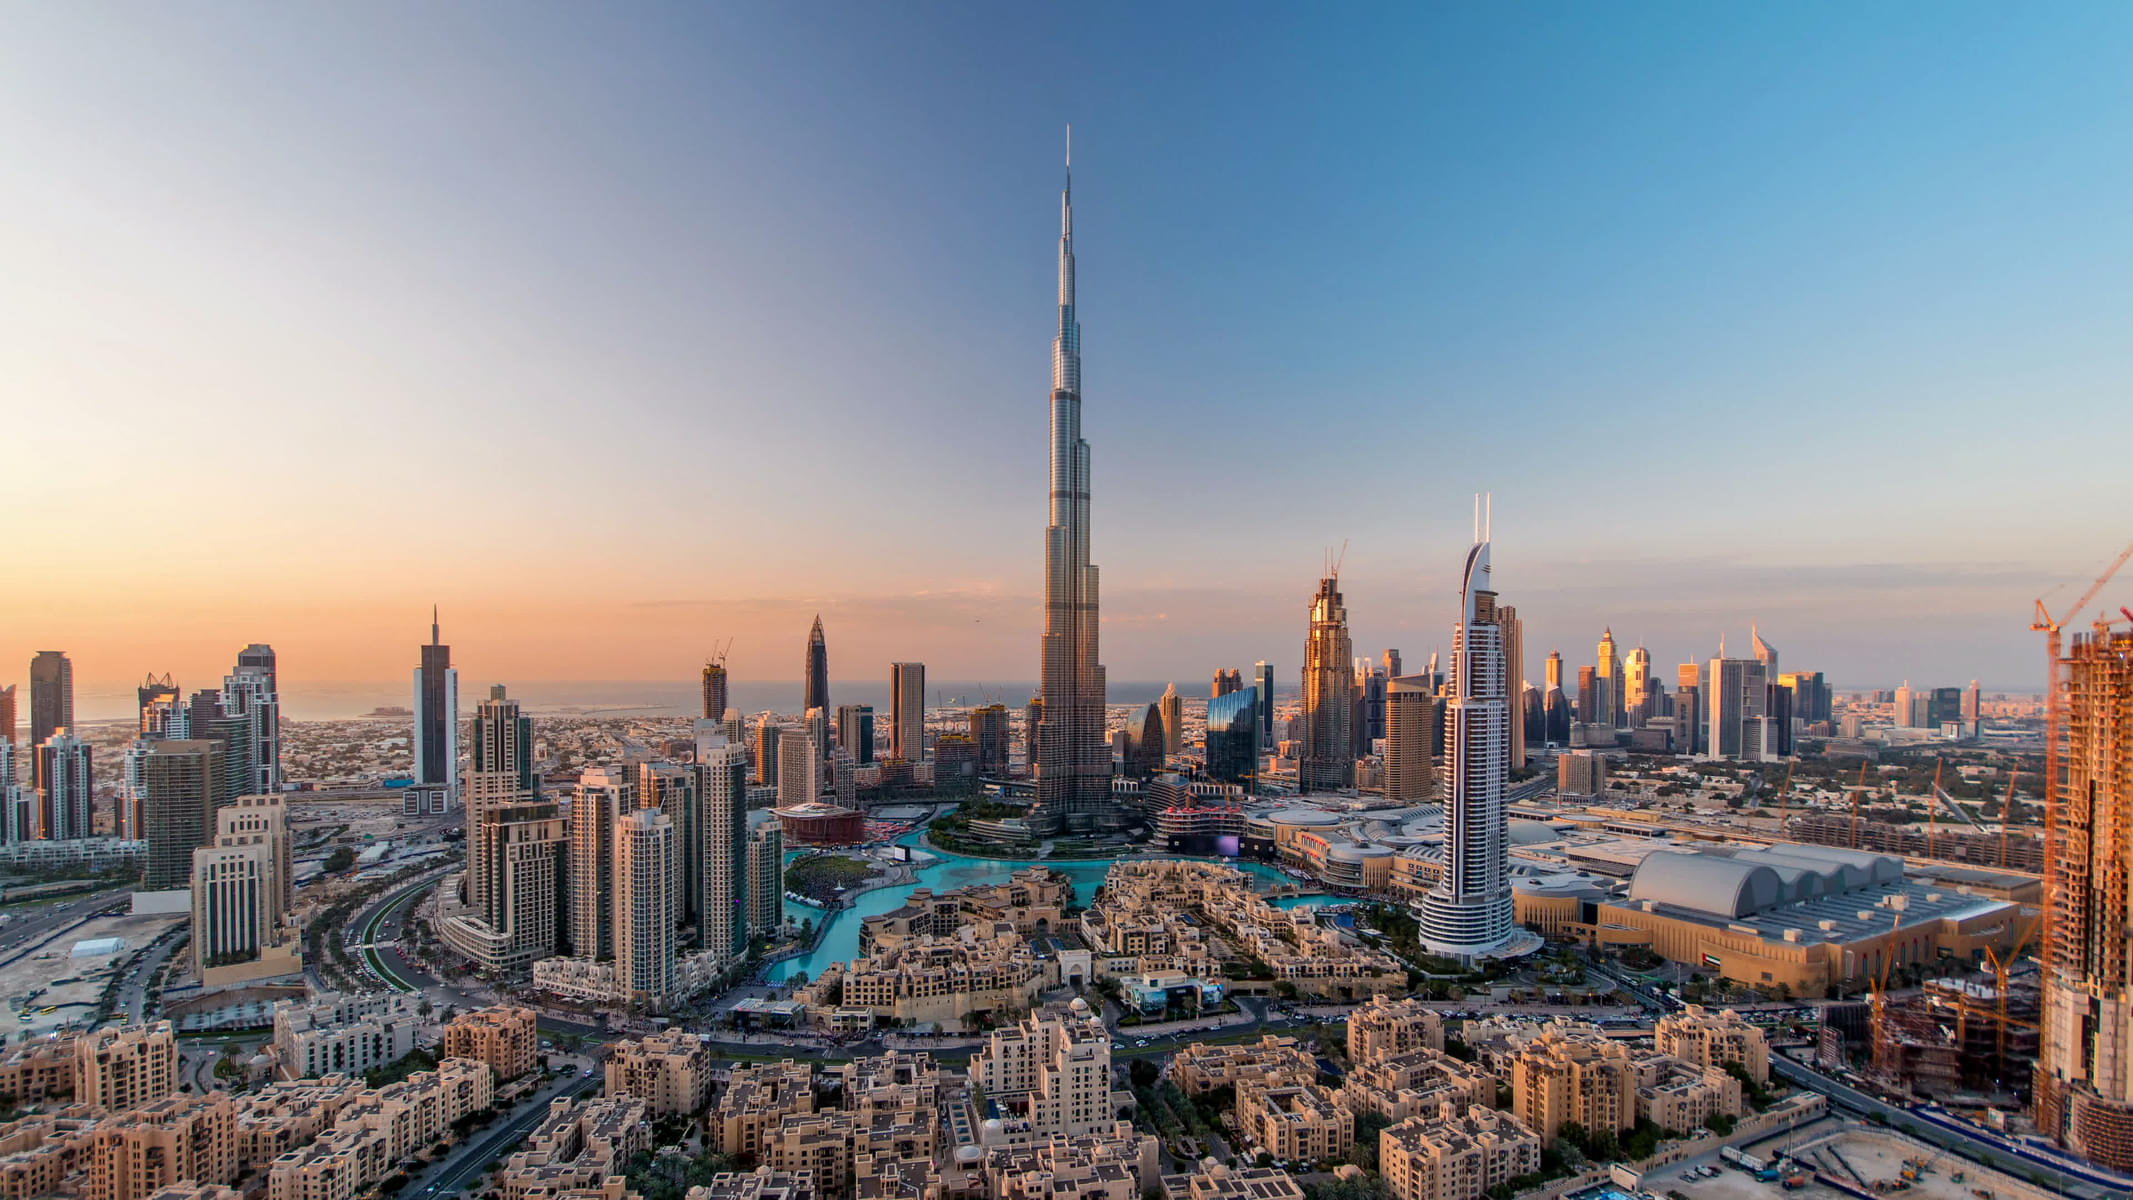 A landscape view of the tallest building in the world